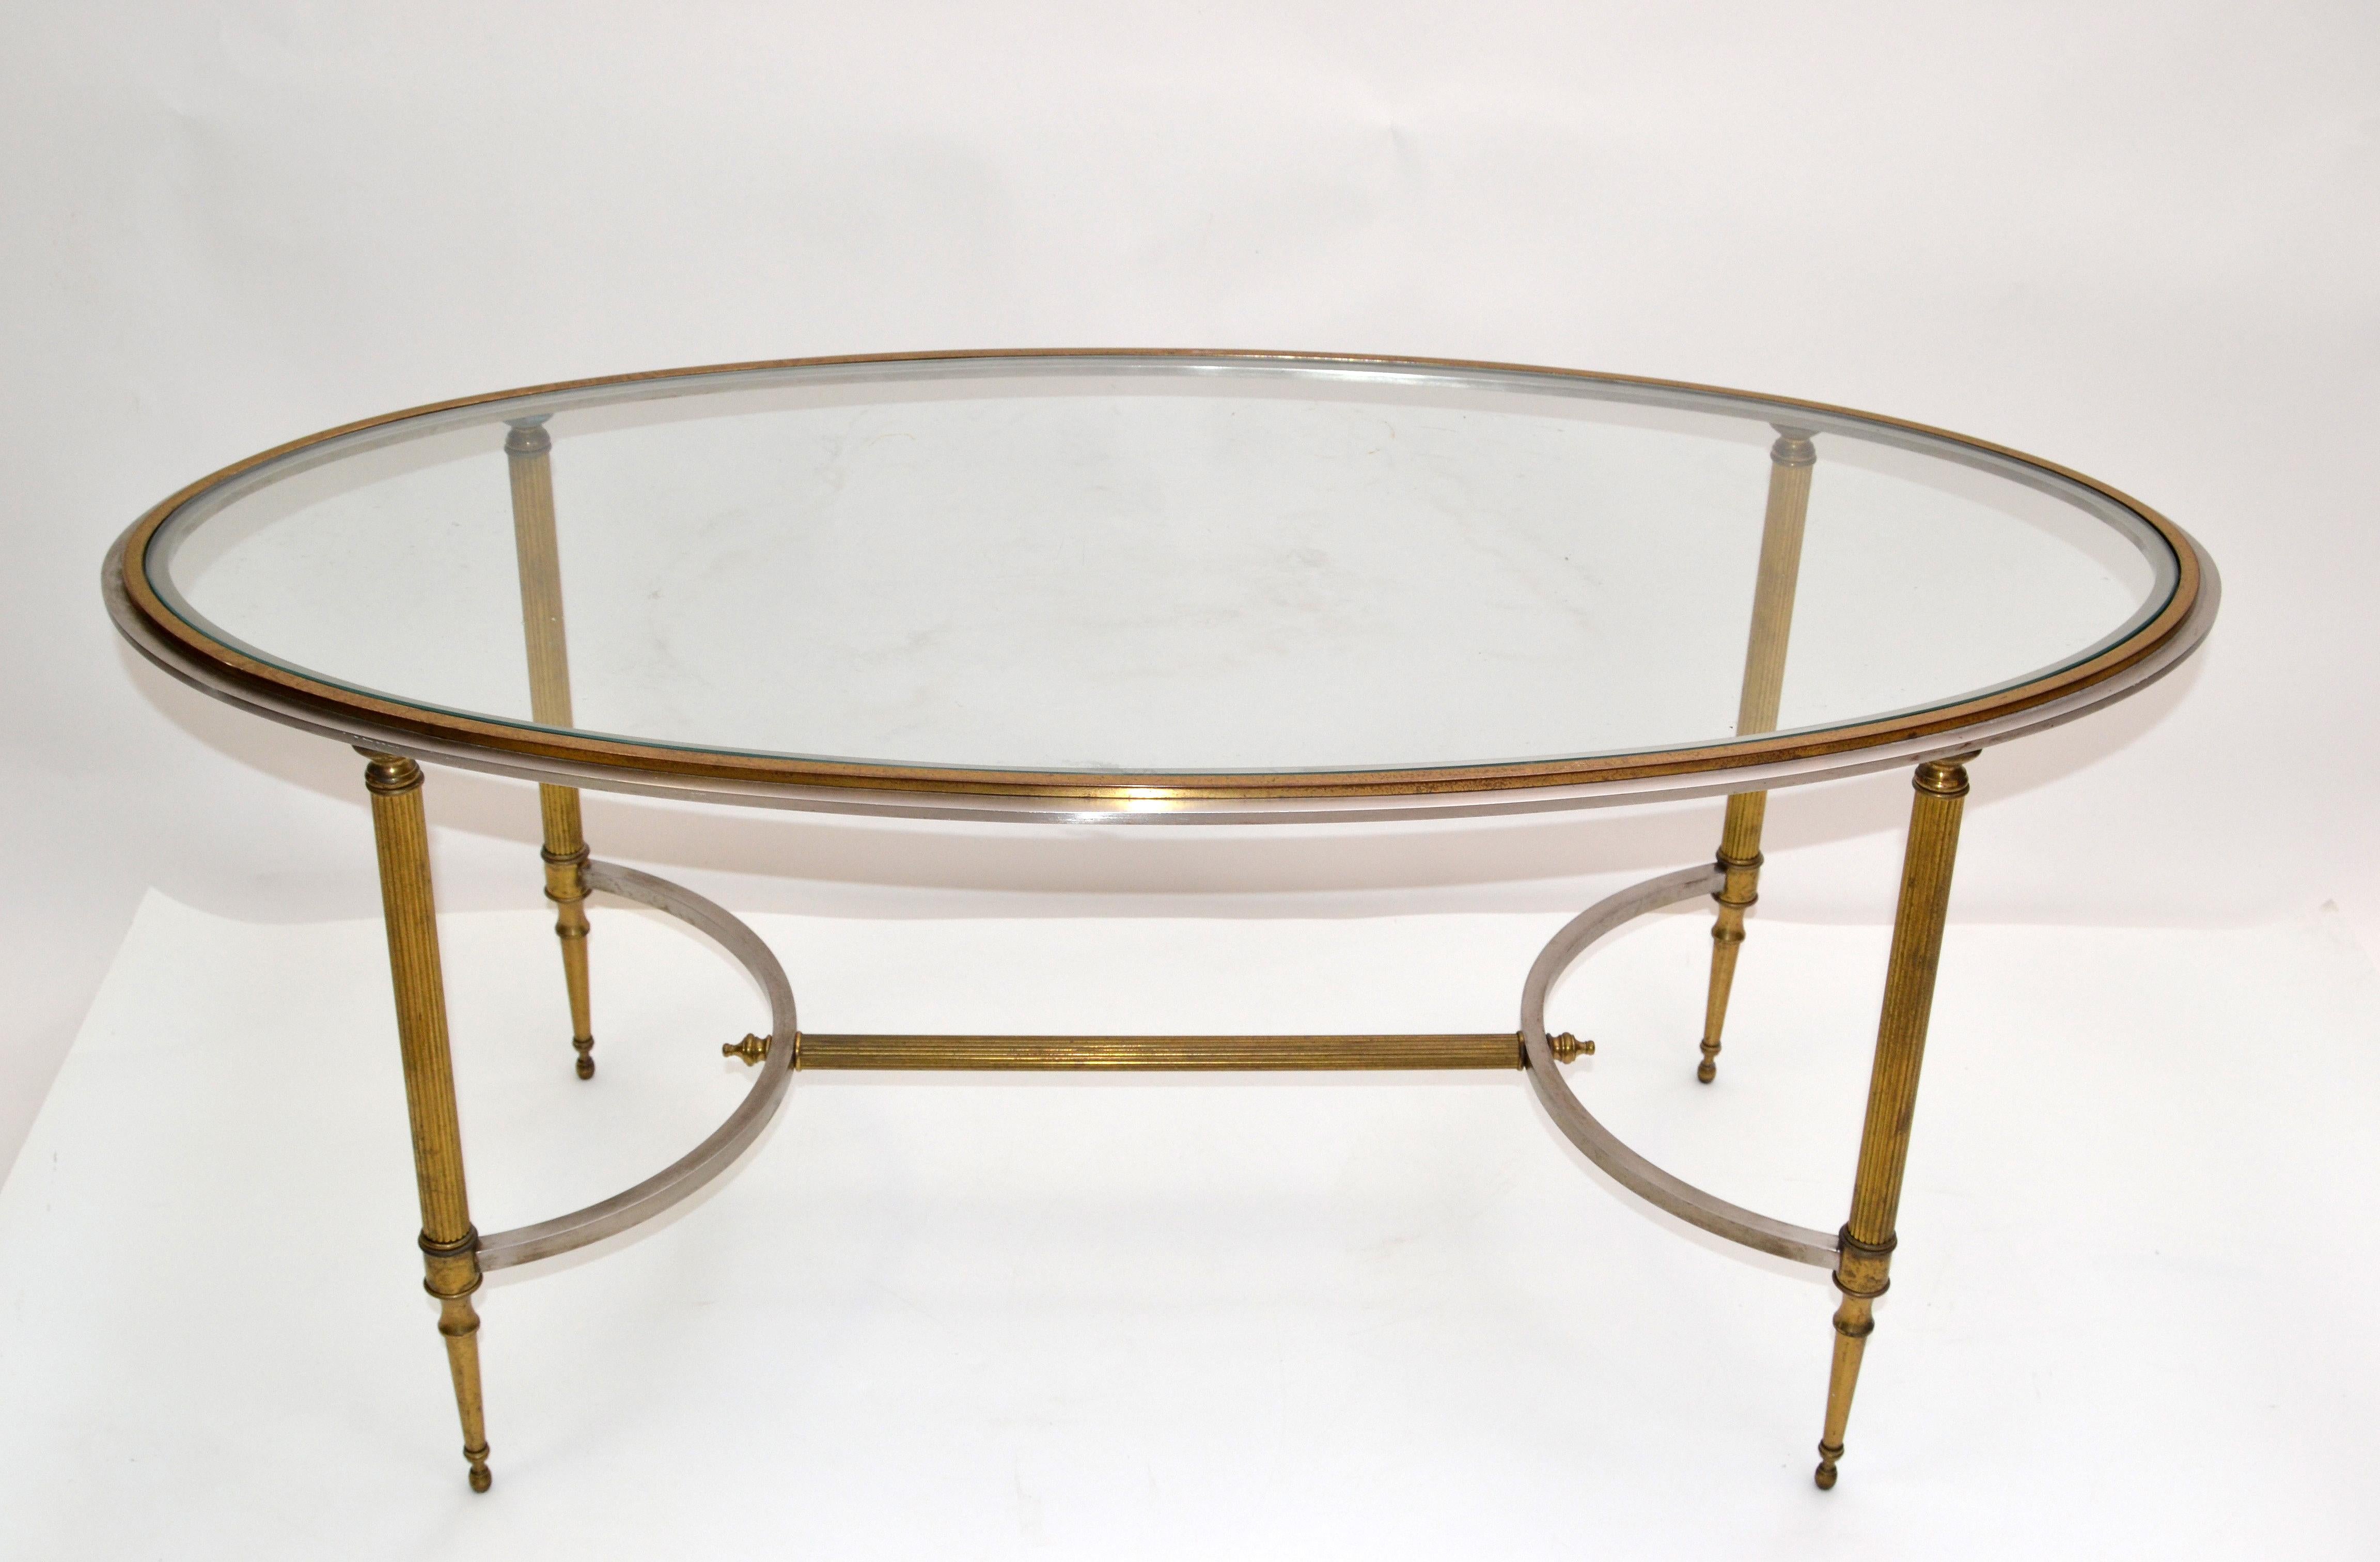 French neoclassical Maison Jansen coffee table in brass with steel borders and oval beveled glass top.
The coffee table is in original condition with warm aged patina to the brass.